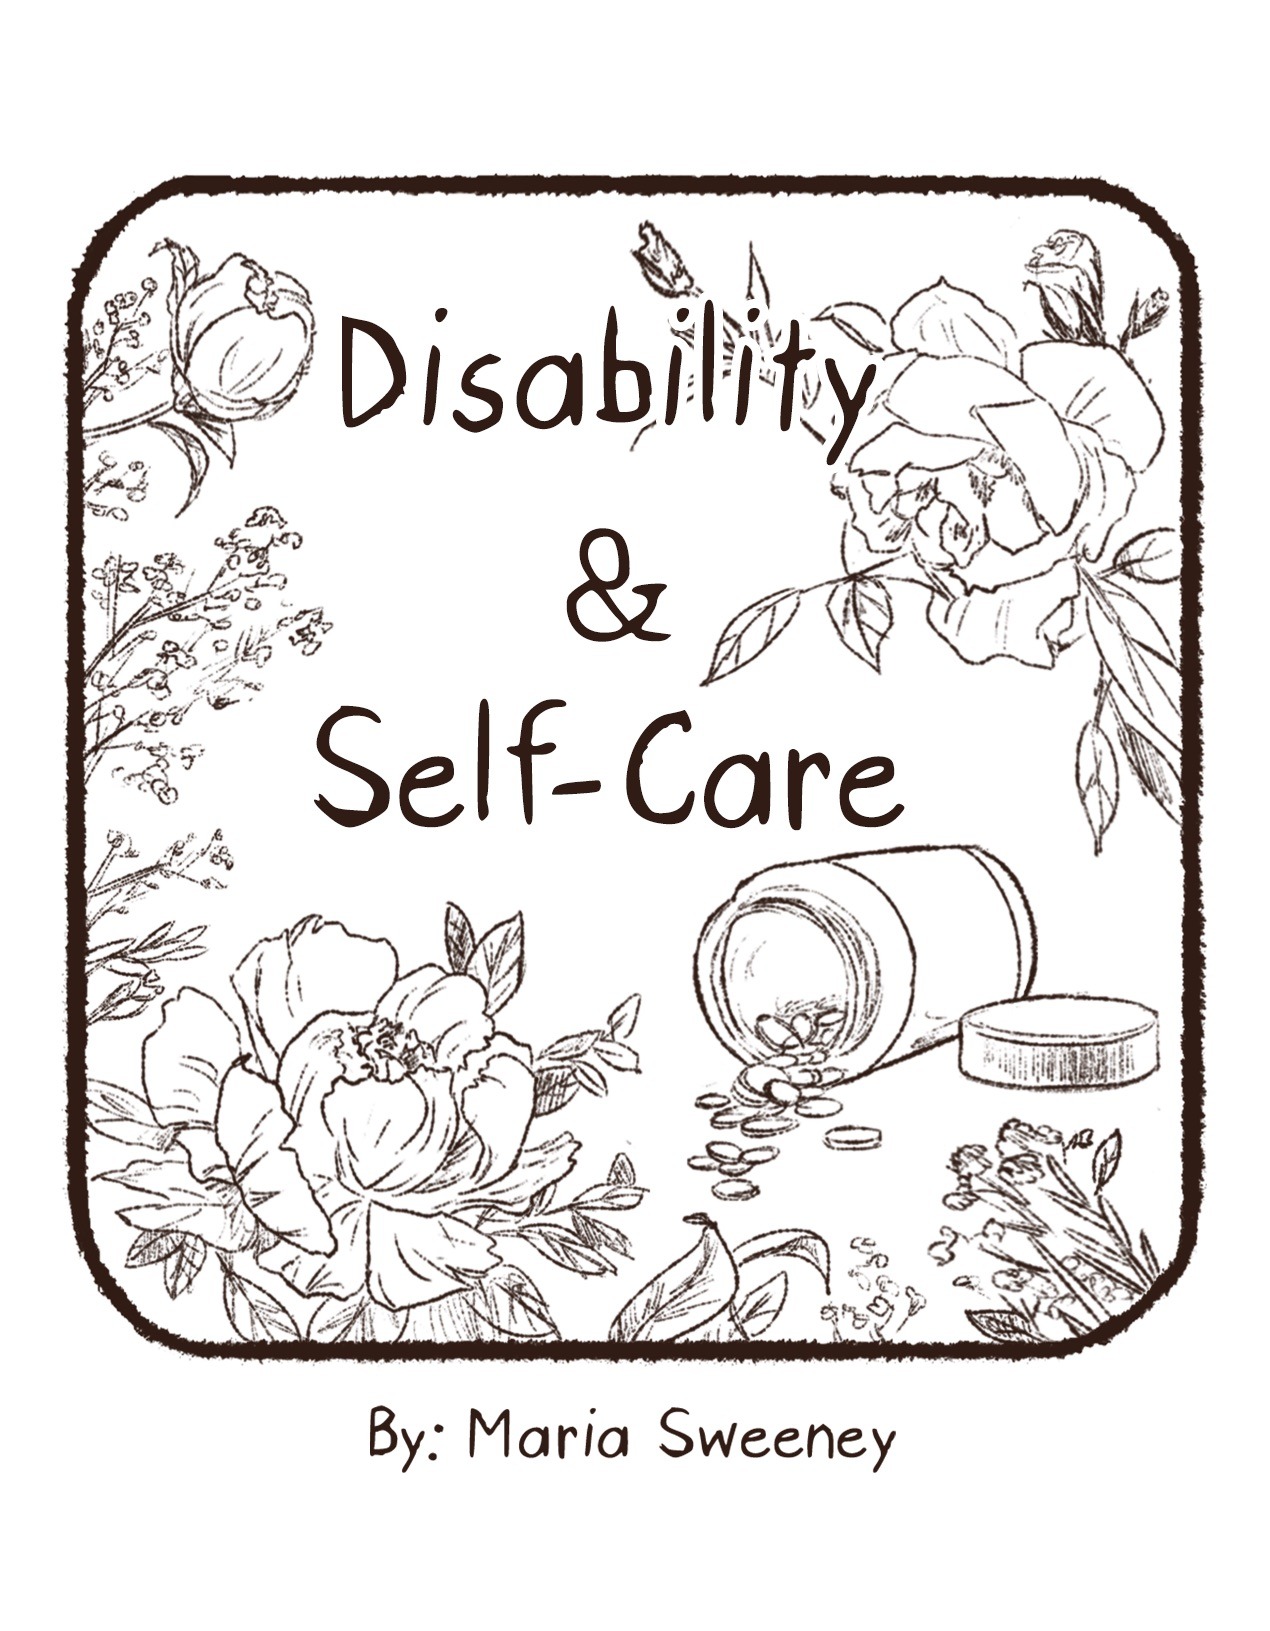 DISABILITY & SELF-CARE by Maria Sweeney https://inarutcomics.bigcartel.com/product/disability-self-care
This educational mini-zine focuses on different forms of self-care and how it intersects with the disabled community. Some issues include how...